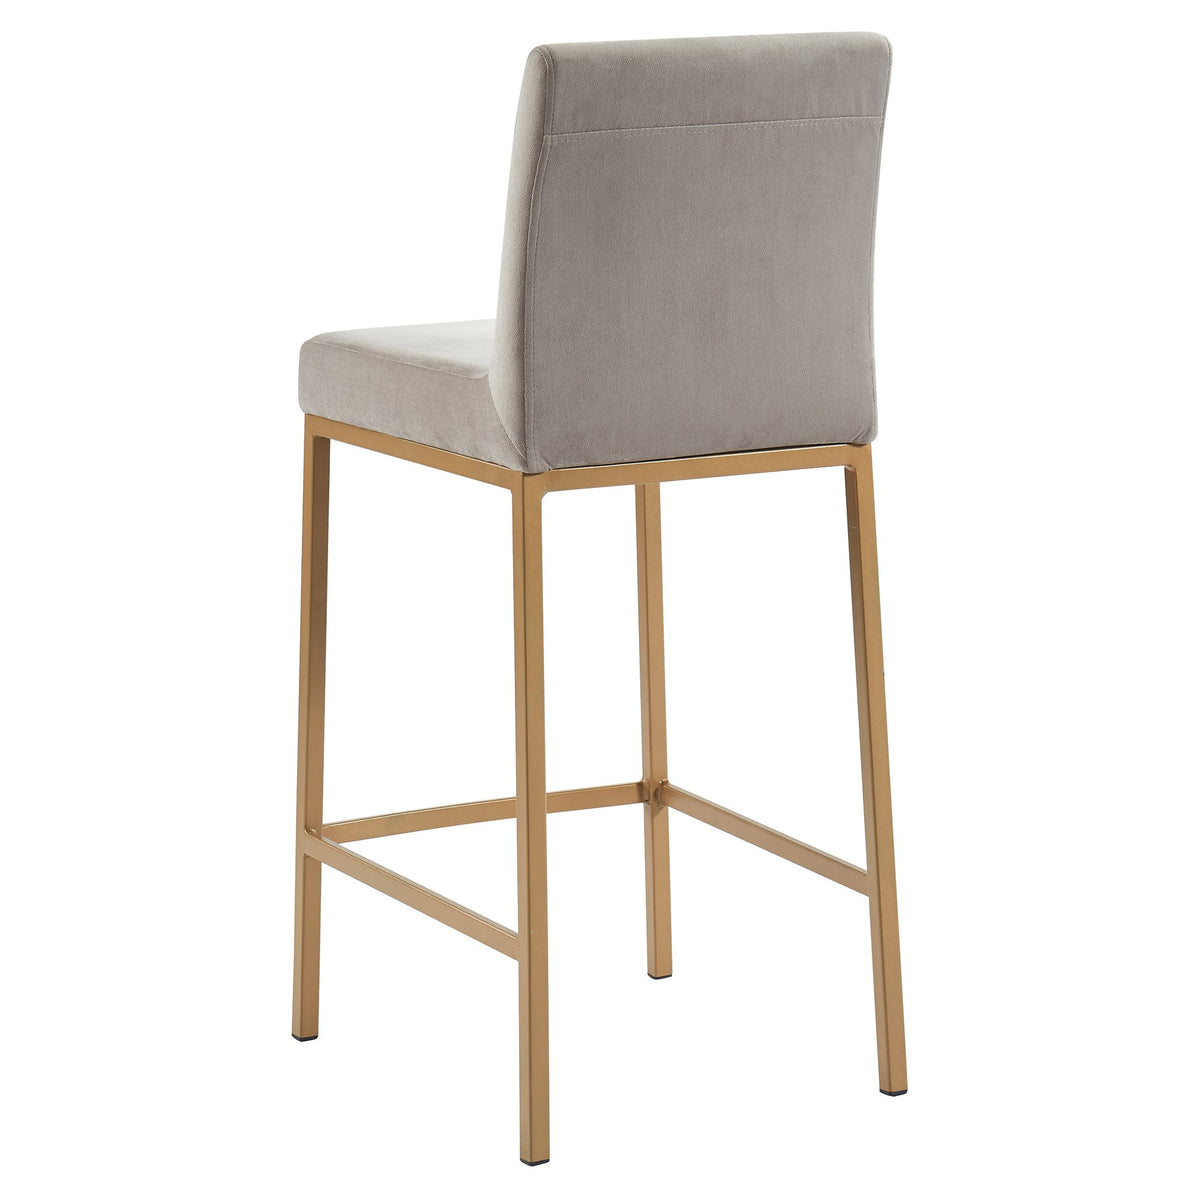 Astrid 26" Grey Velvet and Gold Legs Counter Stools (Set of 2)